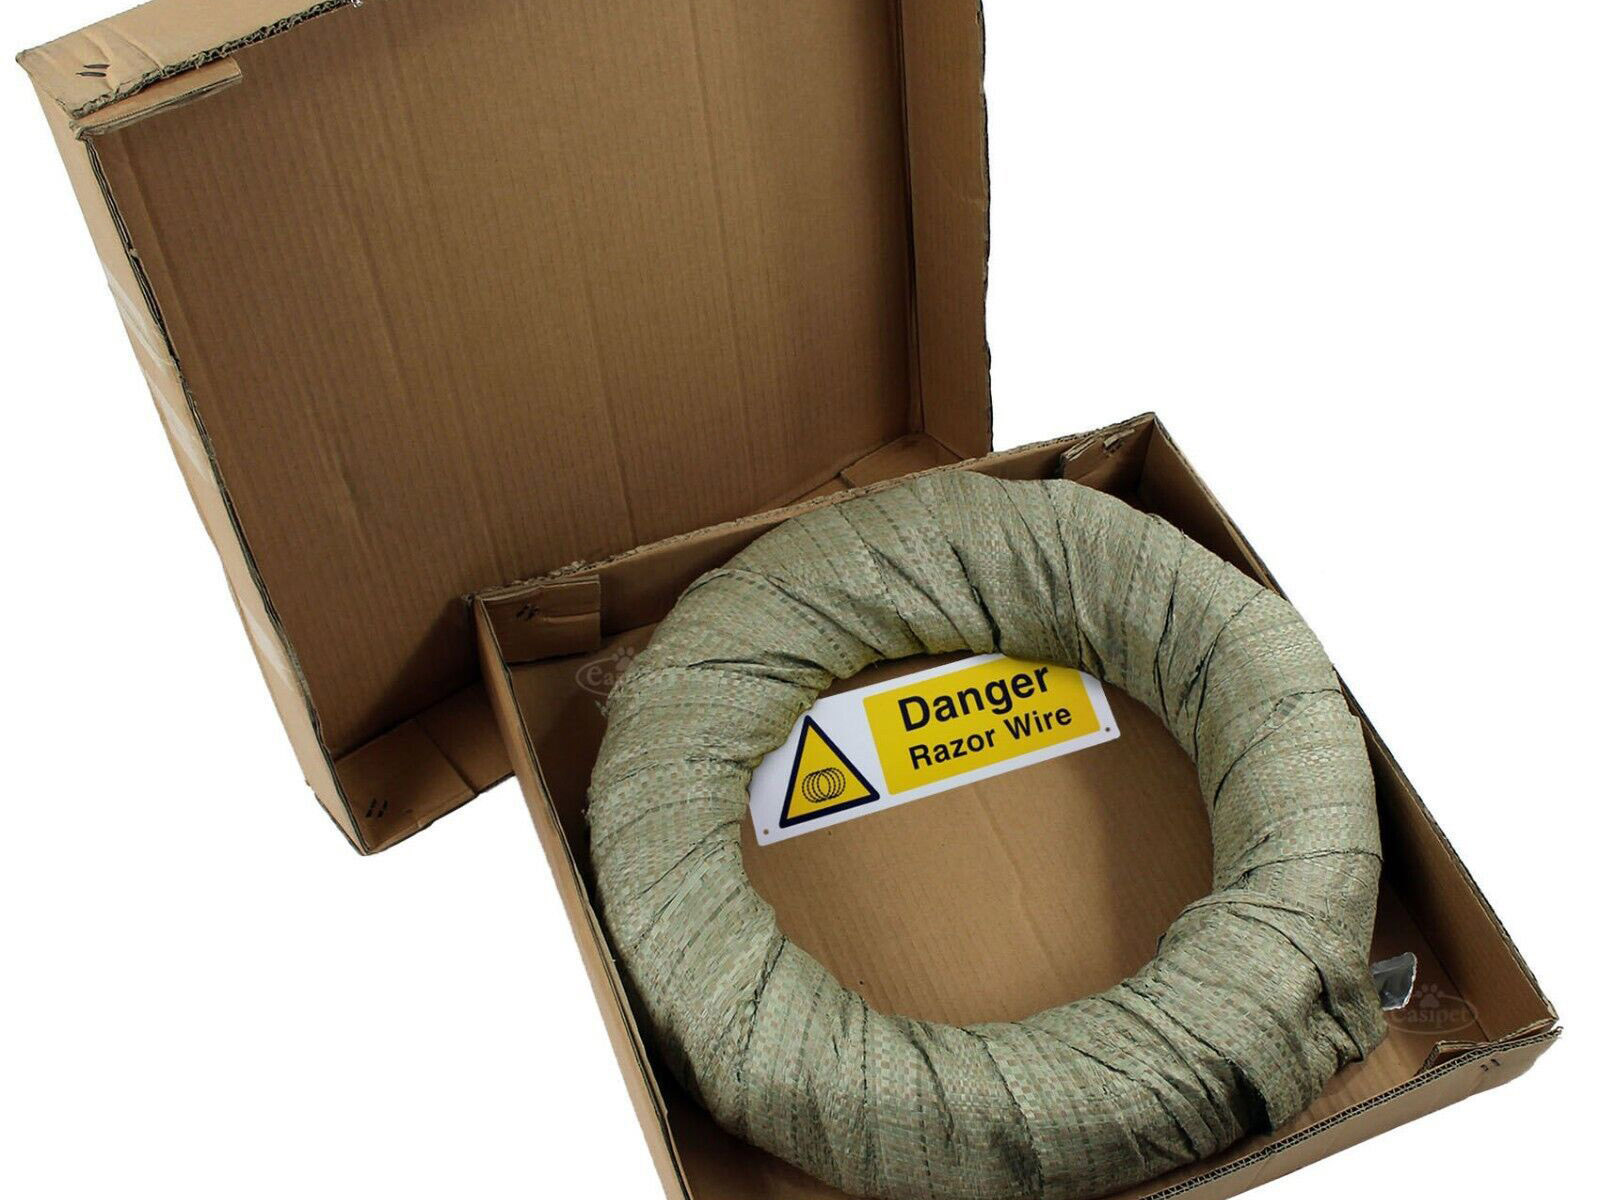 11-razor wire package na may warning wire